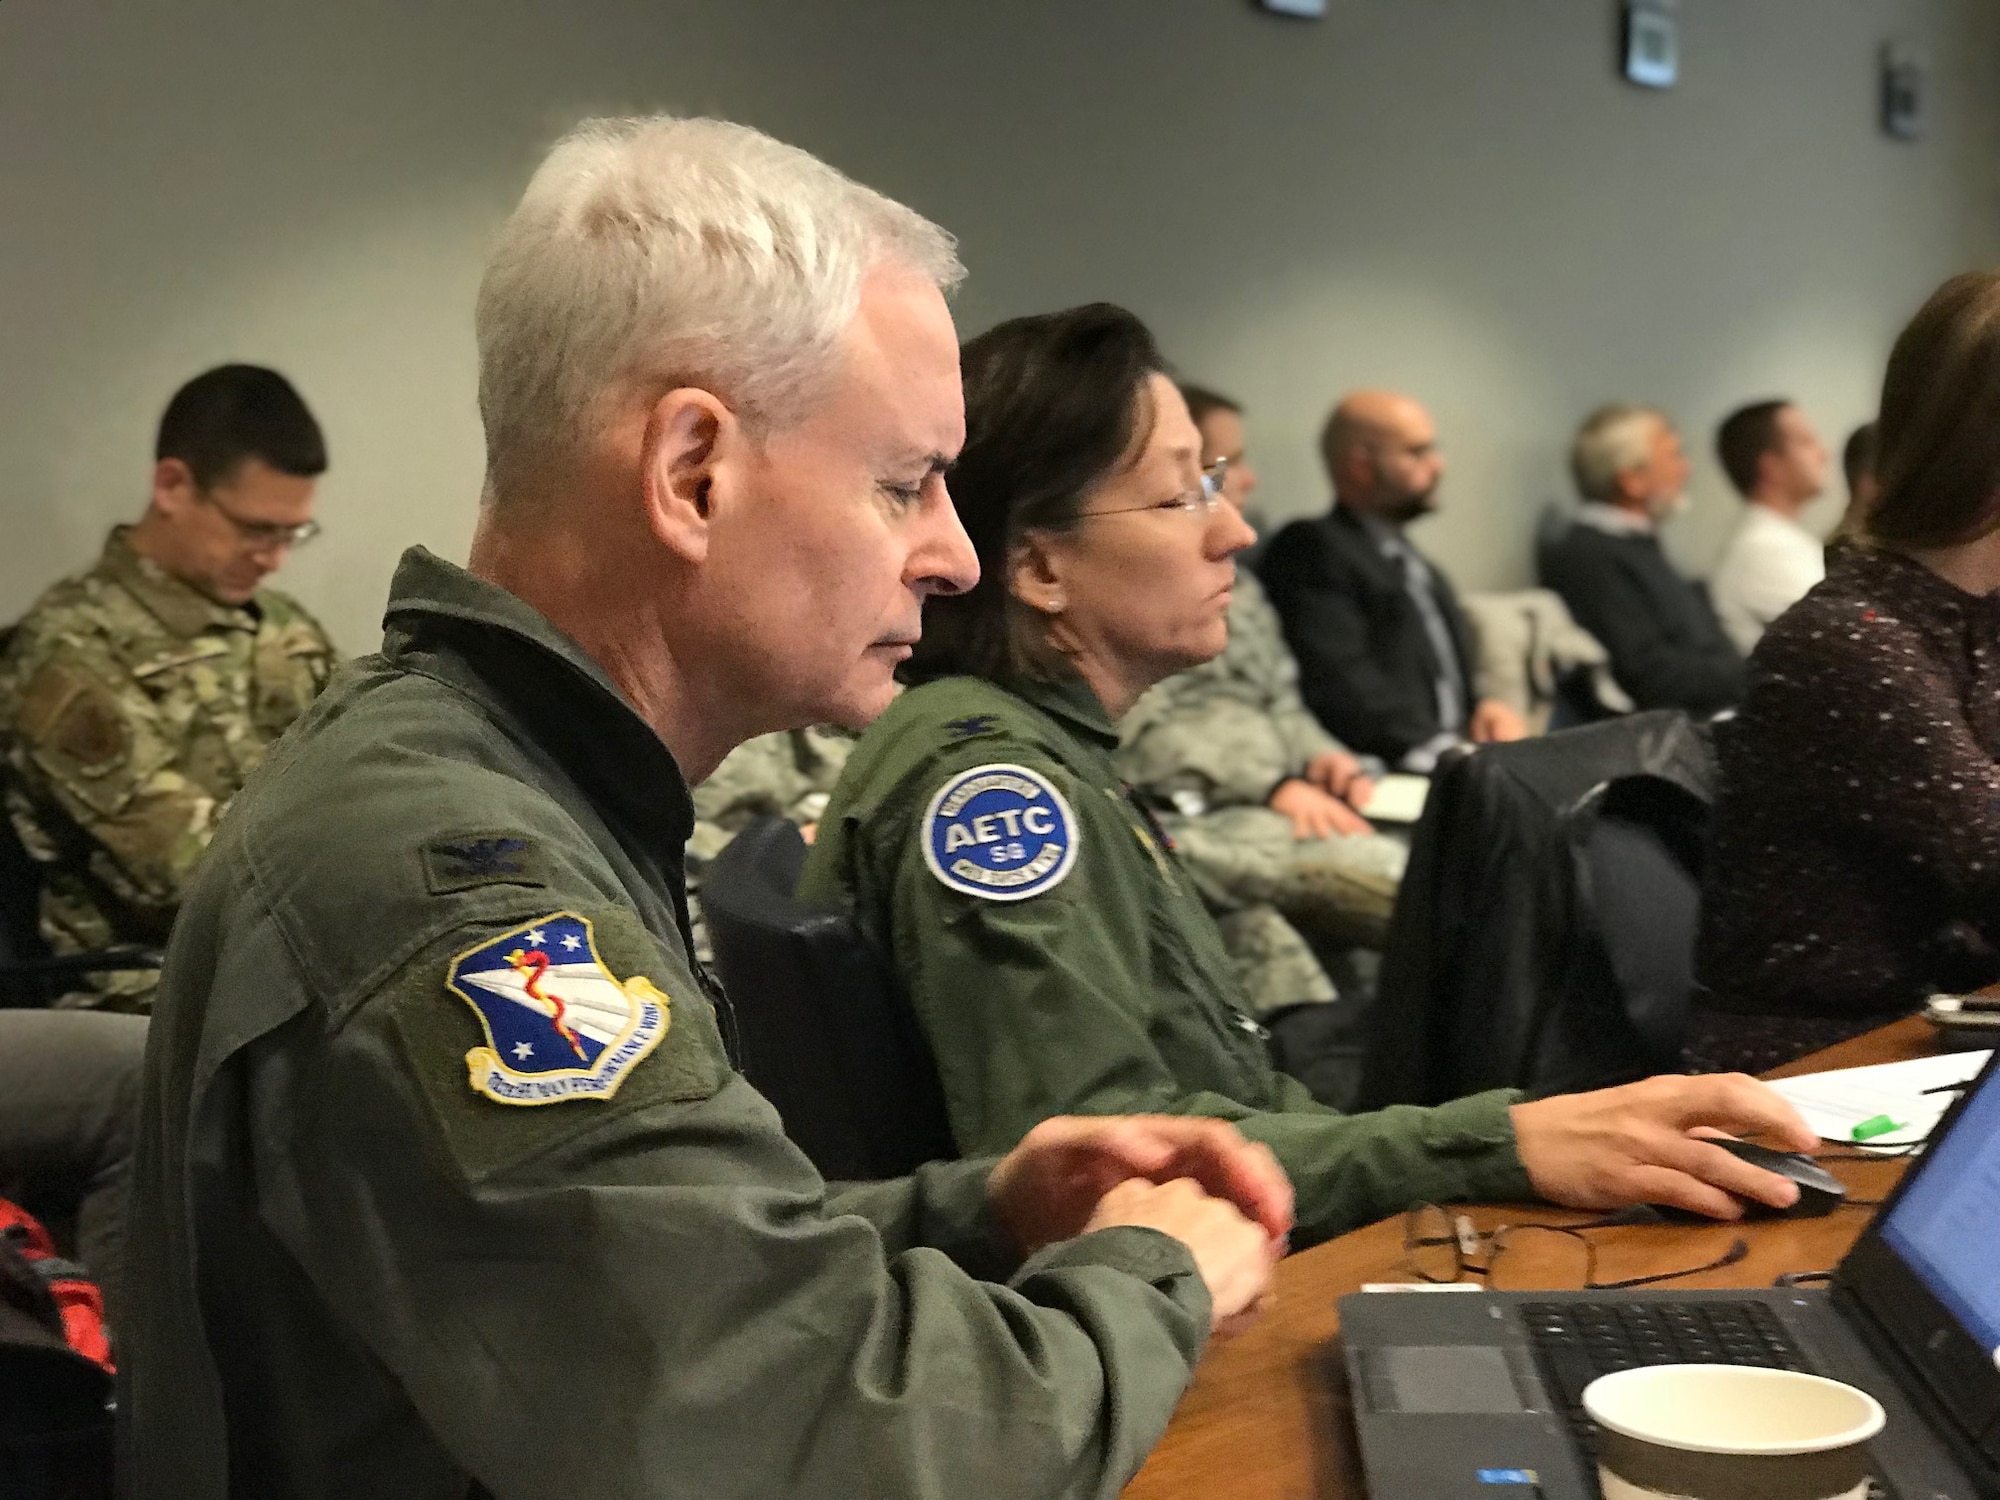 The Air Force Physiological Episodes Action Team, or AF PEAT,recently held a “hackathon” to update the service-wide roadmap to mitigate physiological episodes. Hackathons